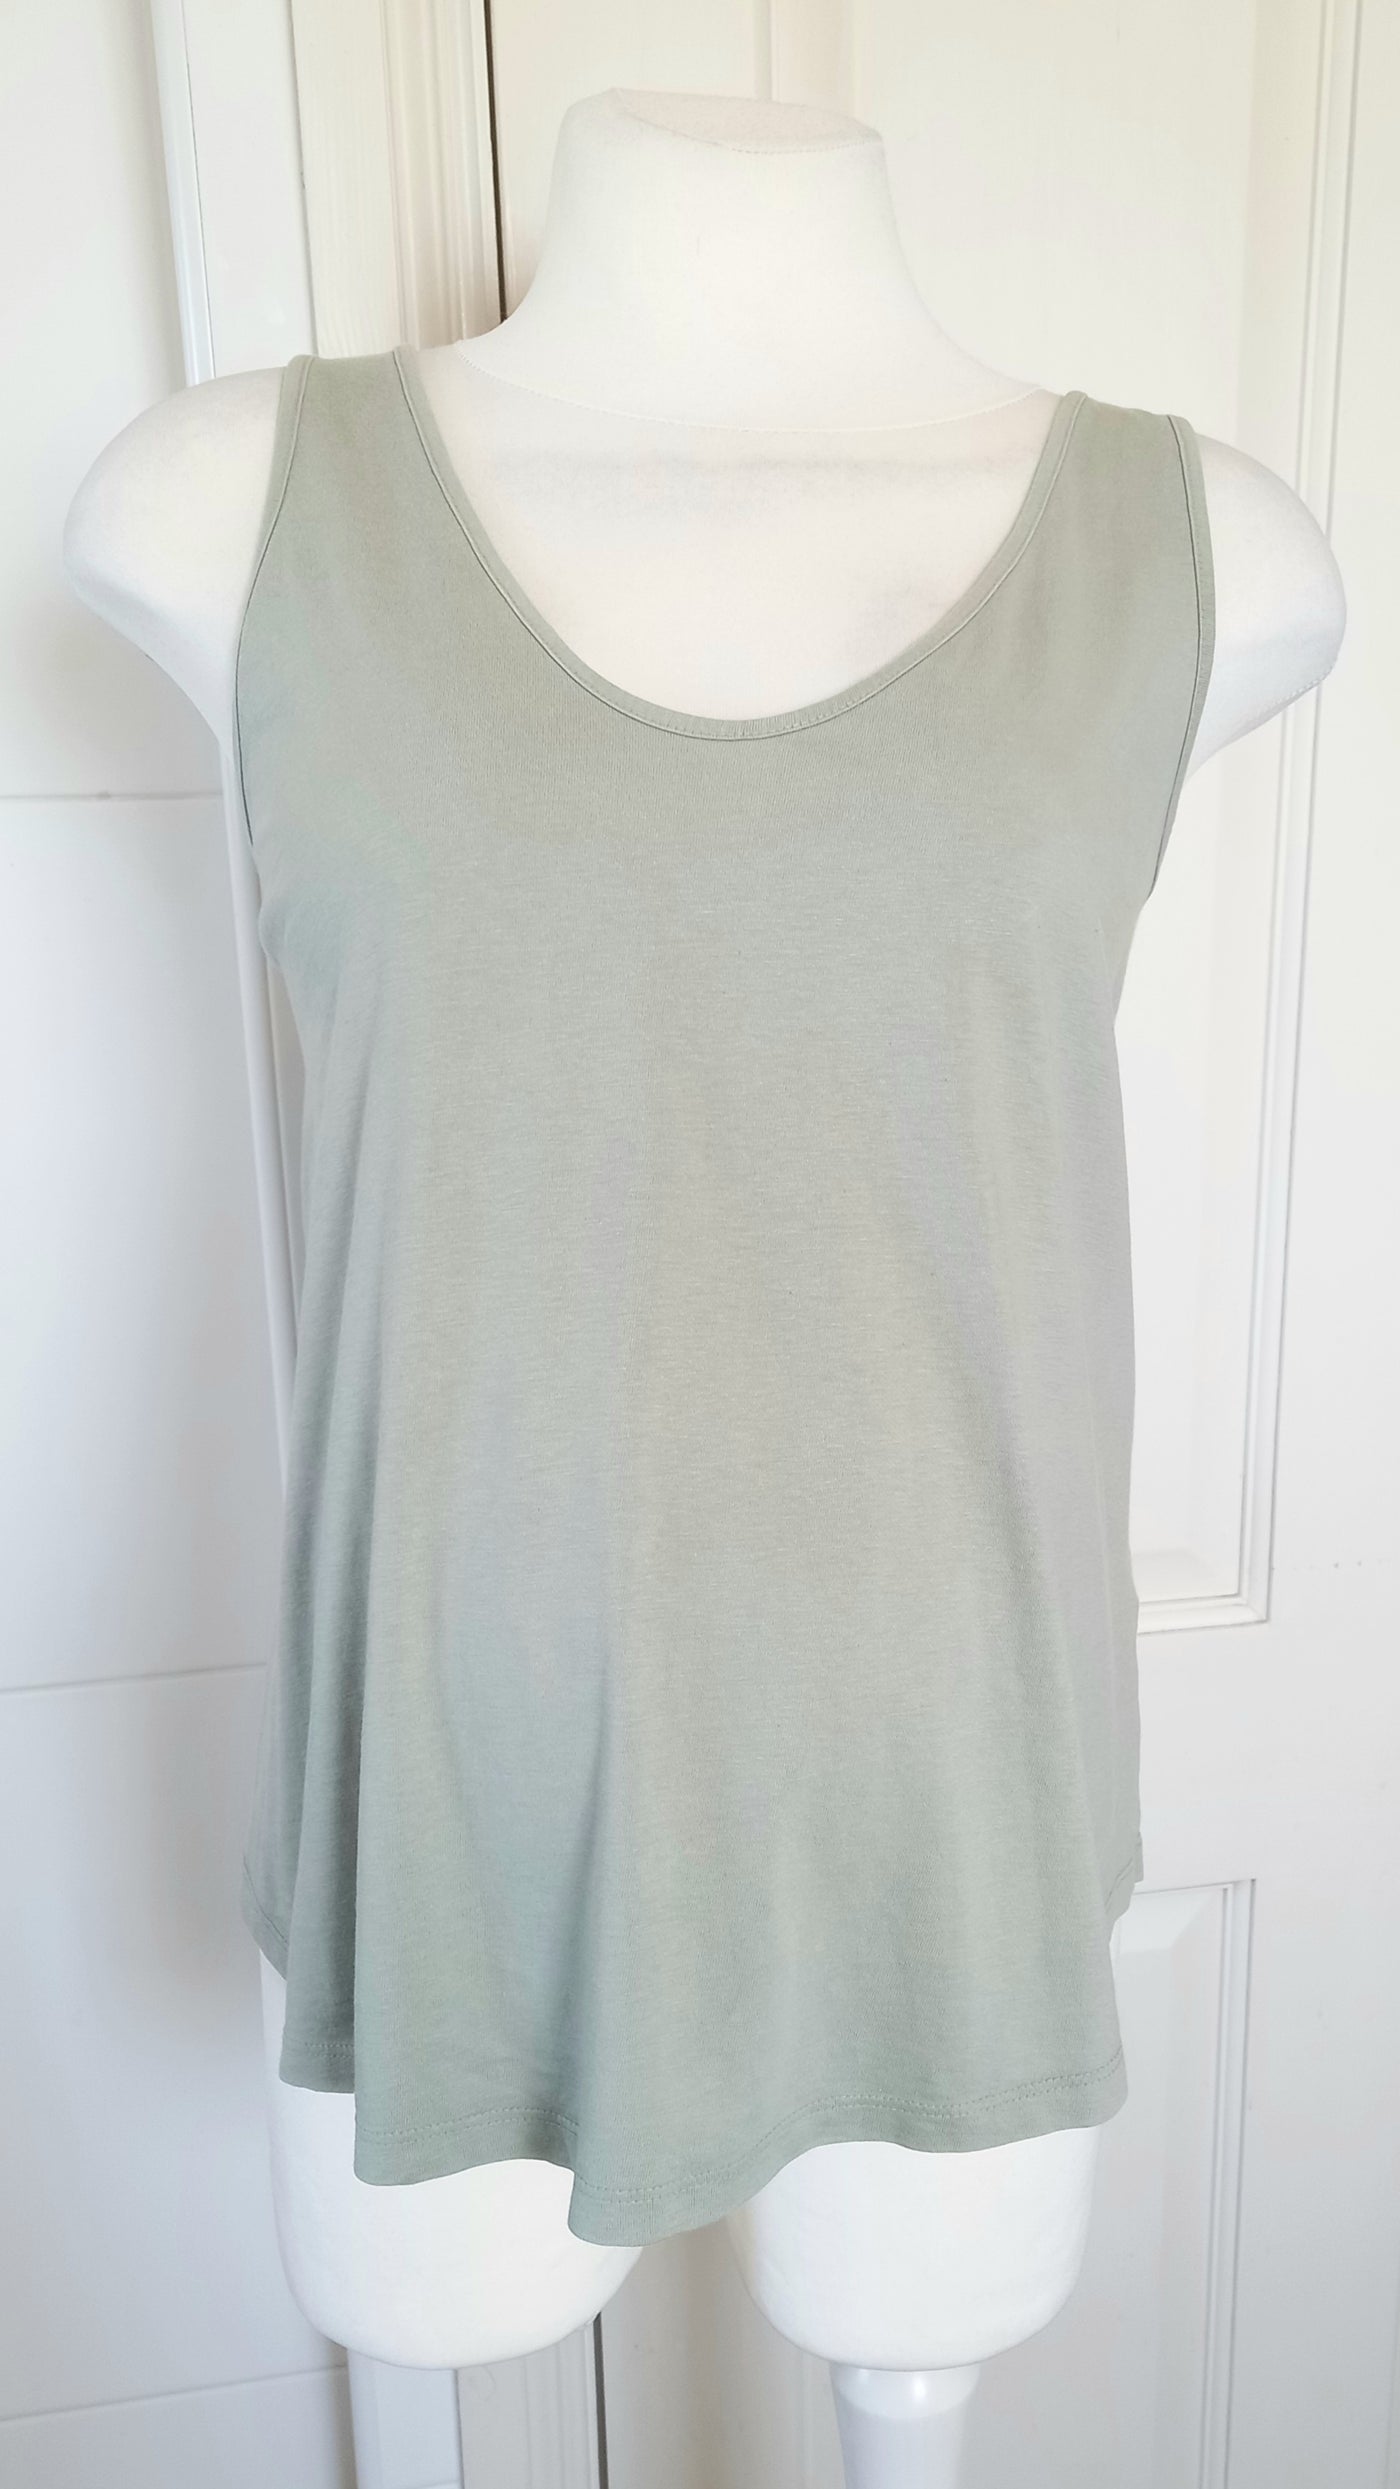 Asos Maternity Sage Green Sleeveless Crop Style Top - Size 16